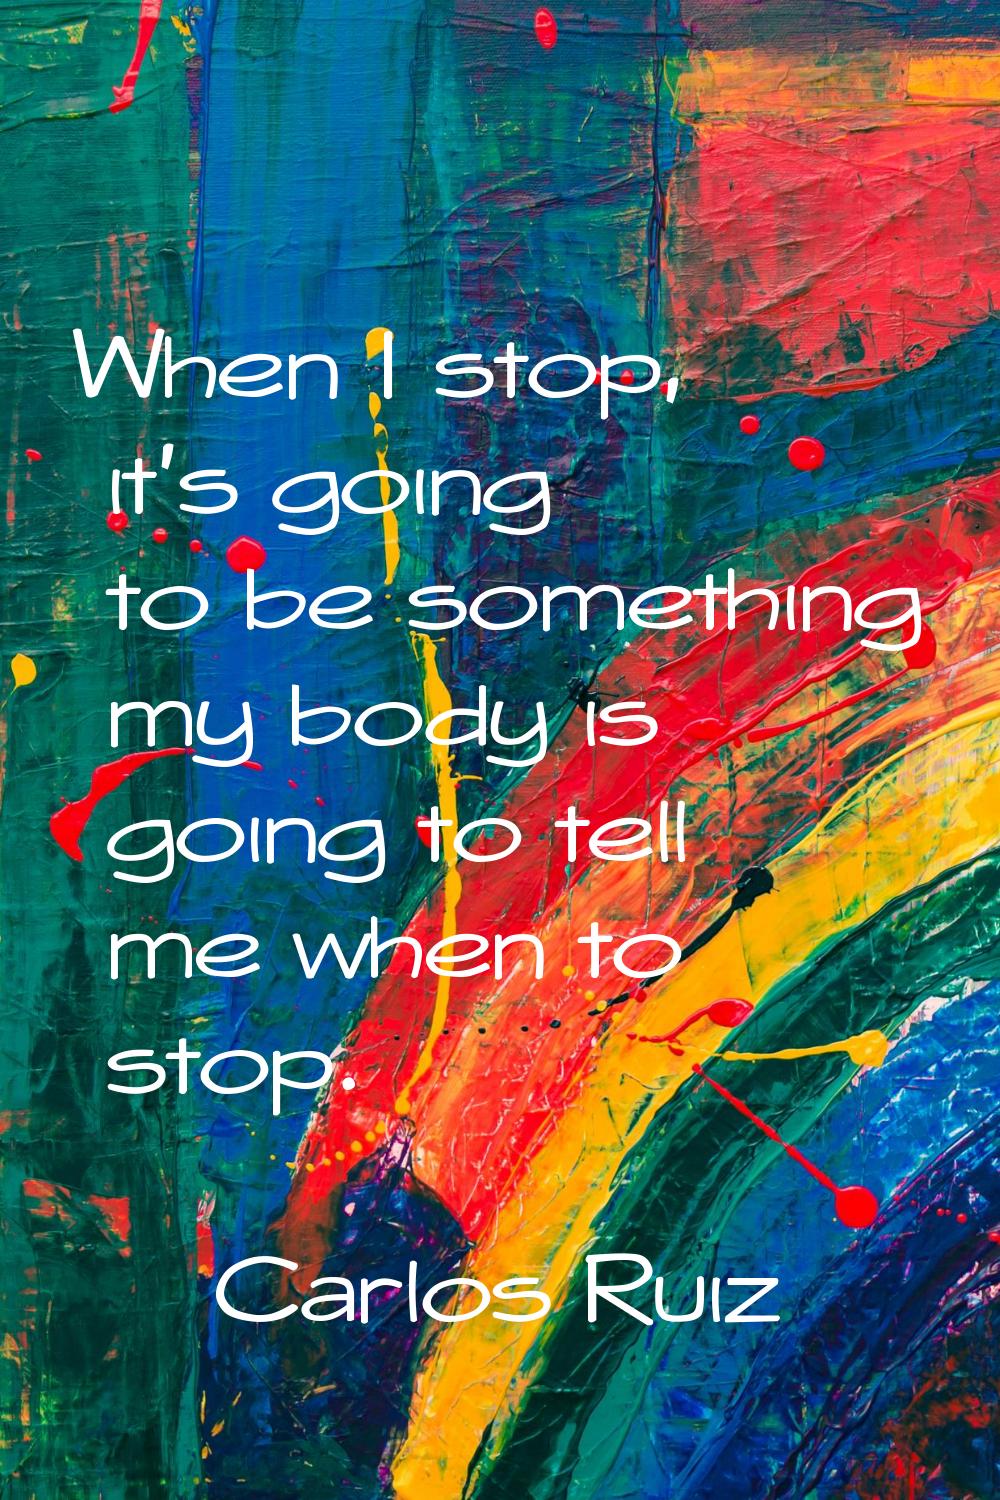 When I stop, it's going to be something my body is going to tell me when to stop.